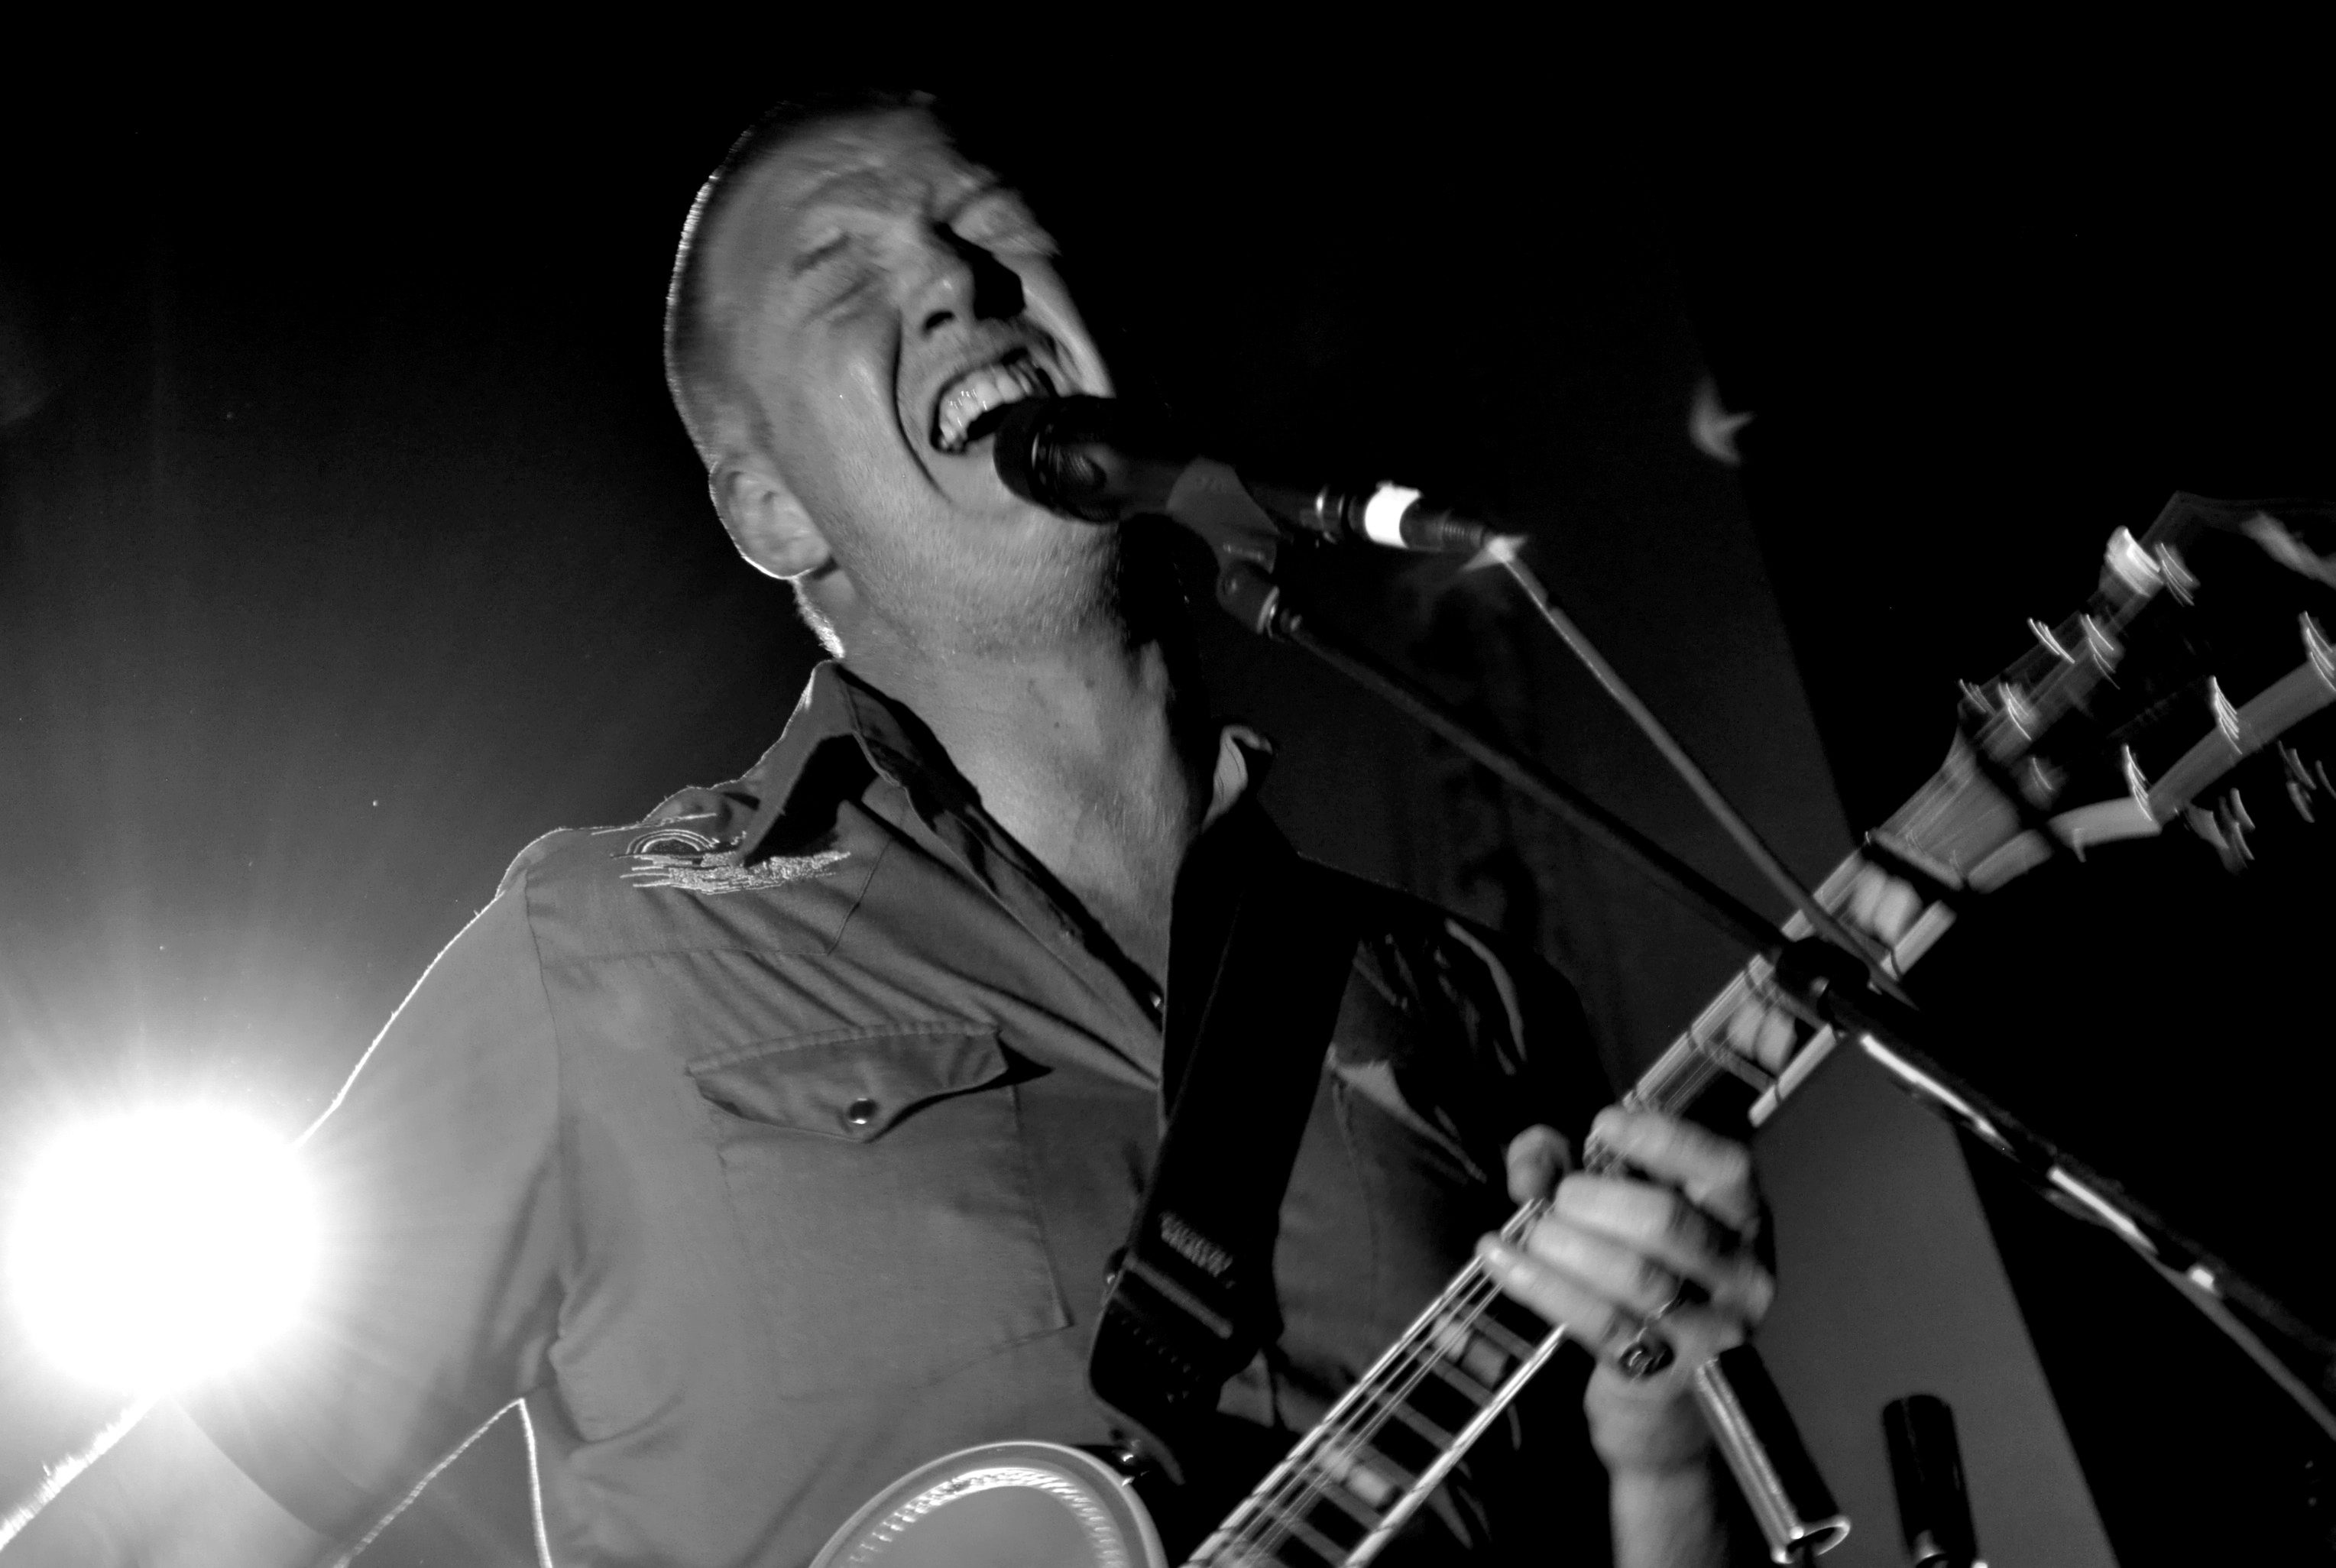 Queens of the Stone Age Finally Release Video for "The Way You Used To Do" Outside of Apple Music Paywall